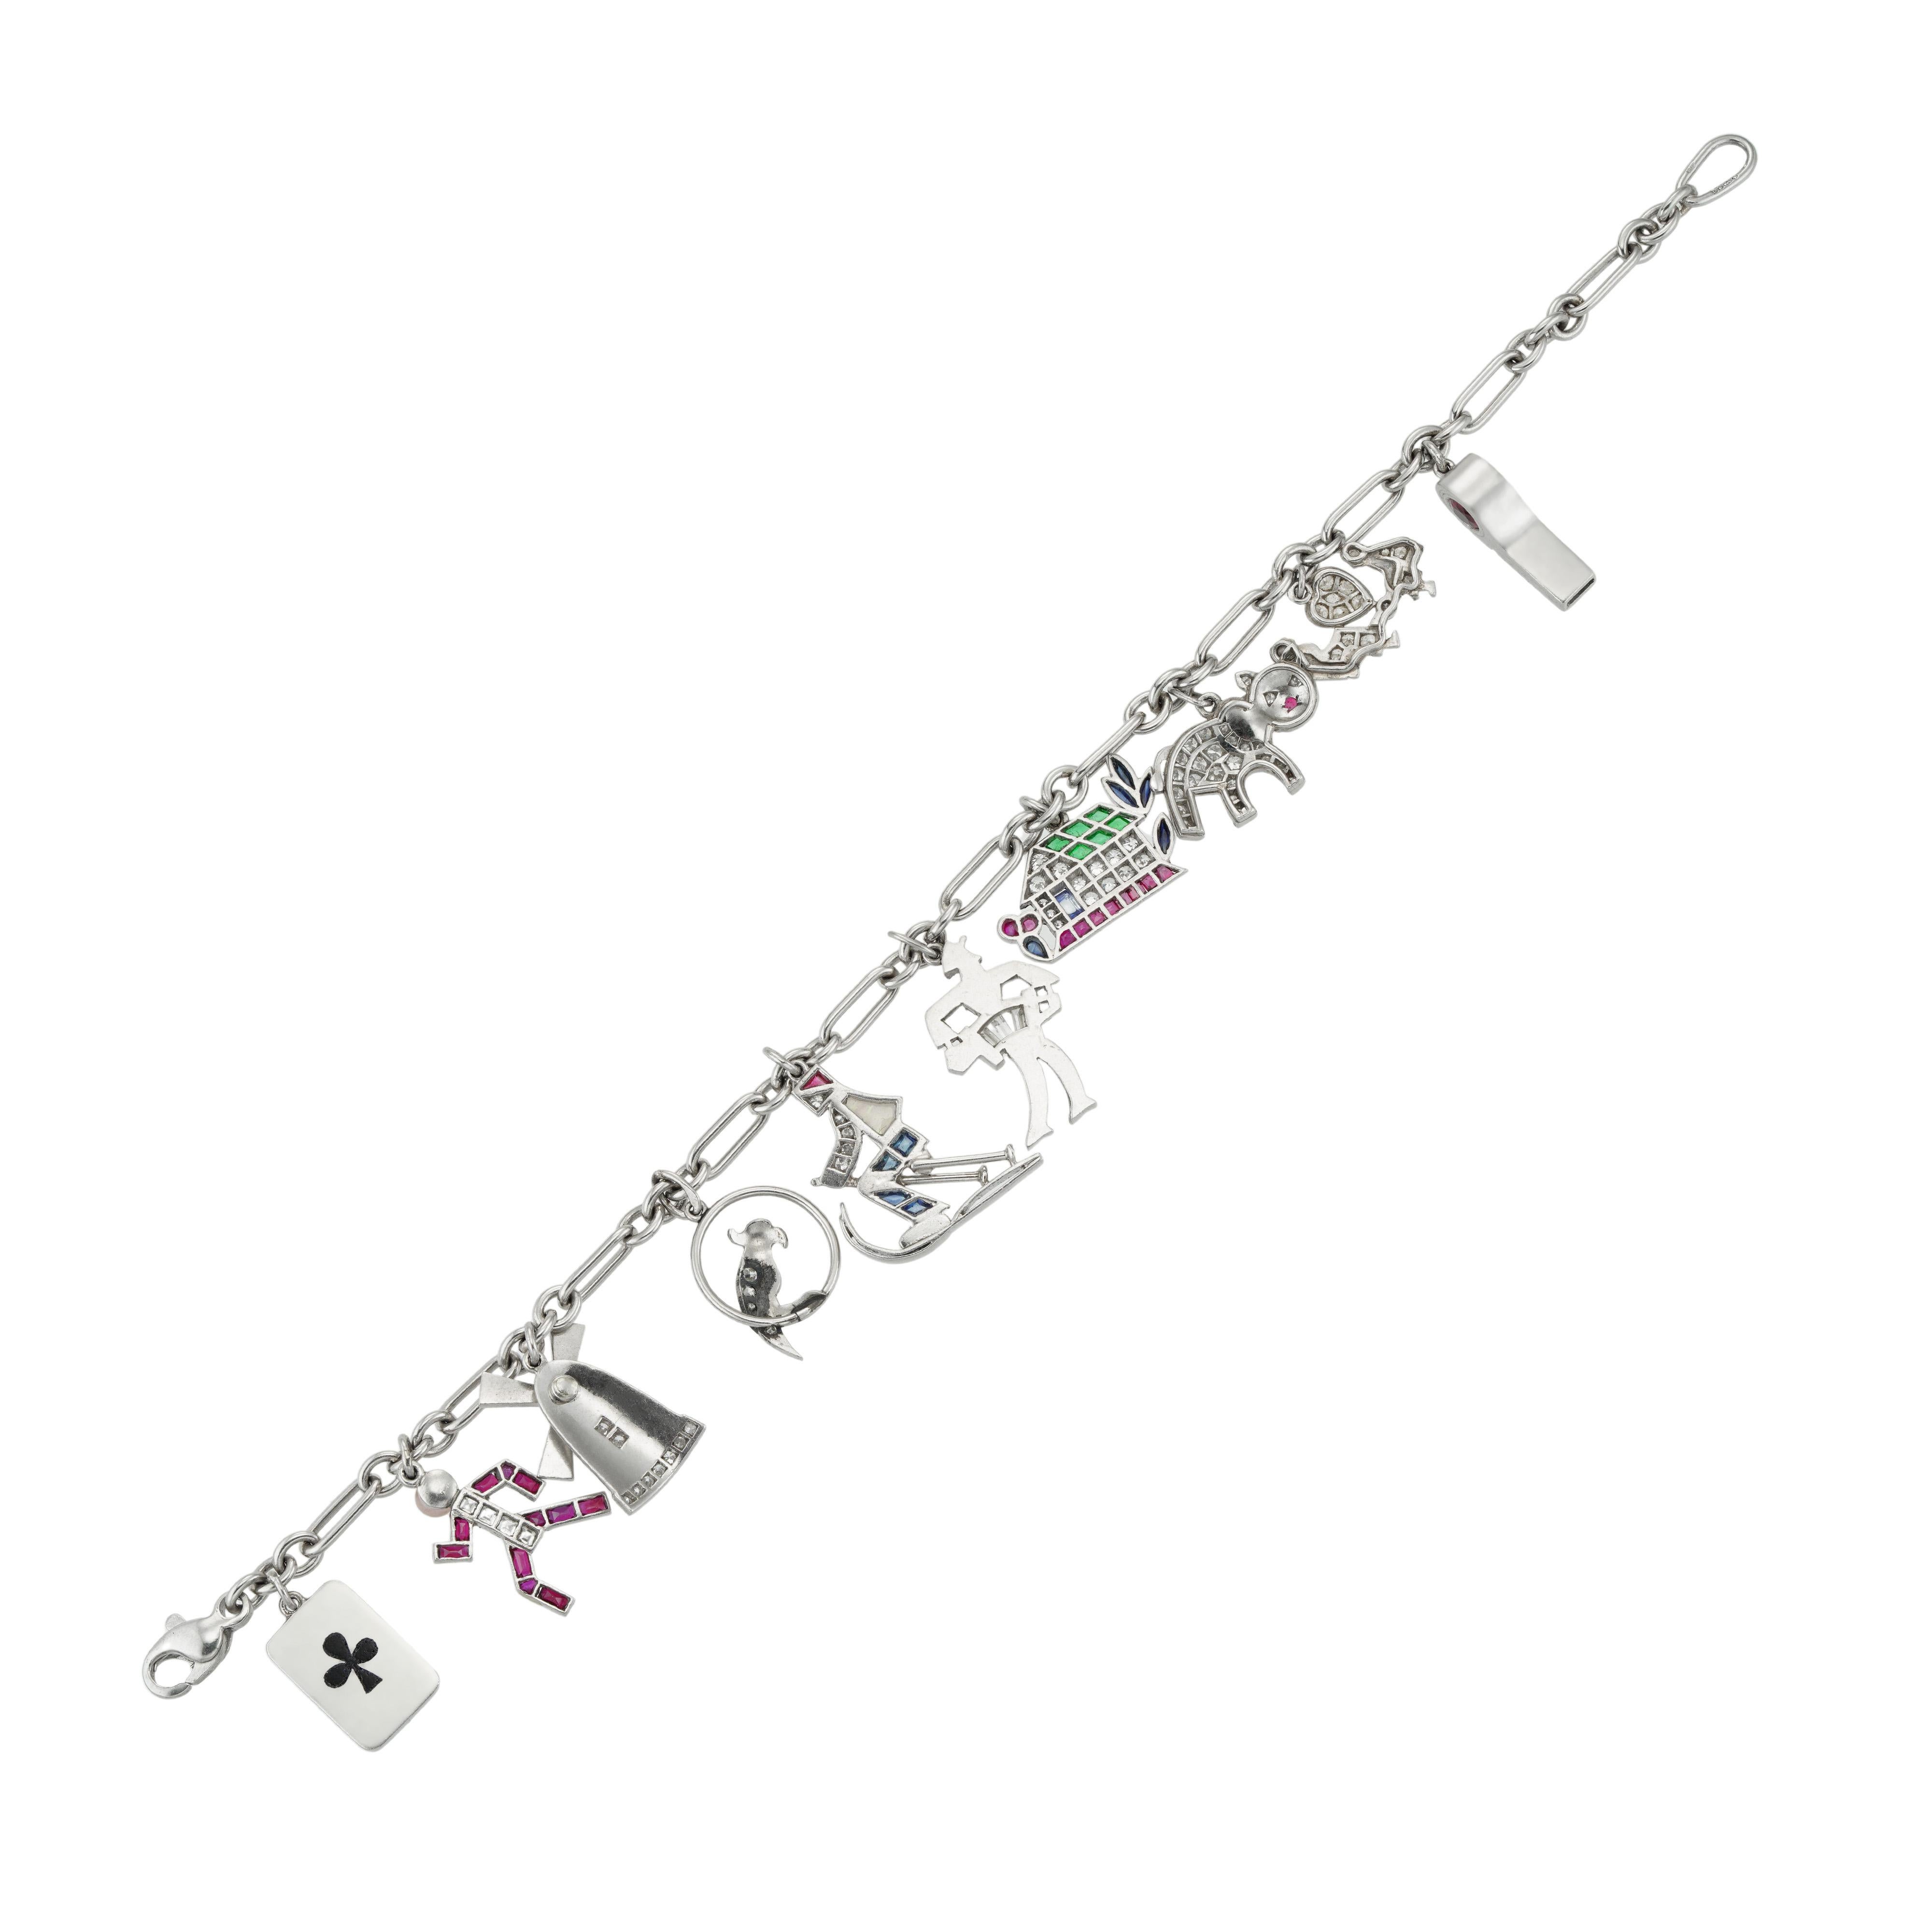 A multi gem-set charm bracelet, the fetter link platinum chain, supporting ten charms, each depicting a different subject, including a whistle, a couple on a see-saw, a cat, a house, a man playing an accordion, a skier, a parrot perched on a ring, a